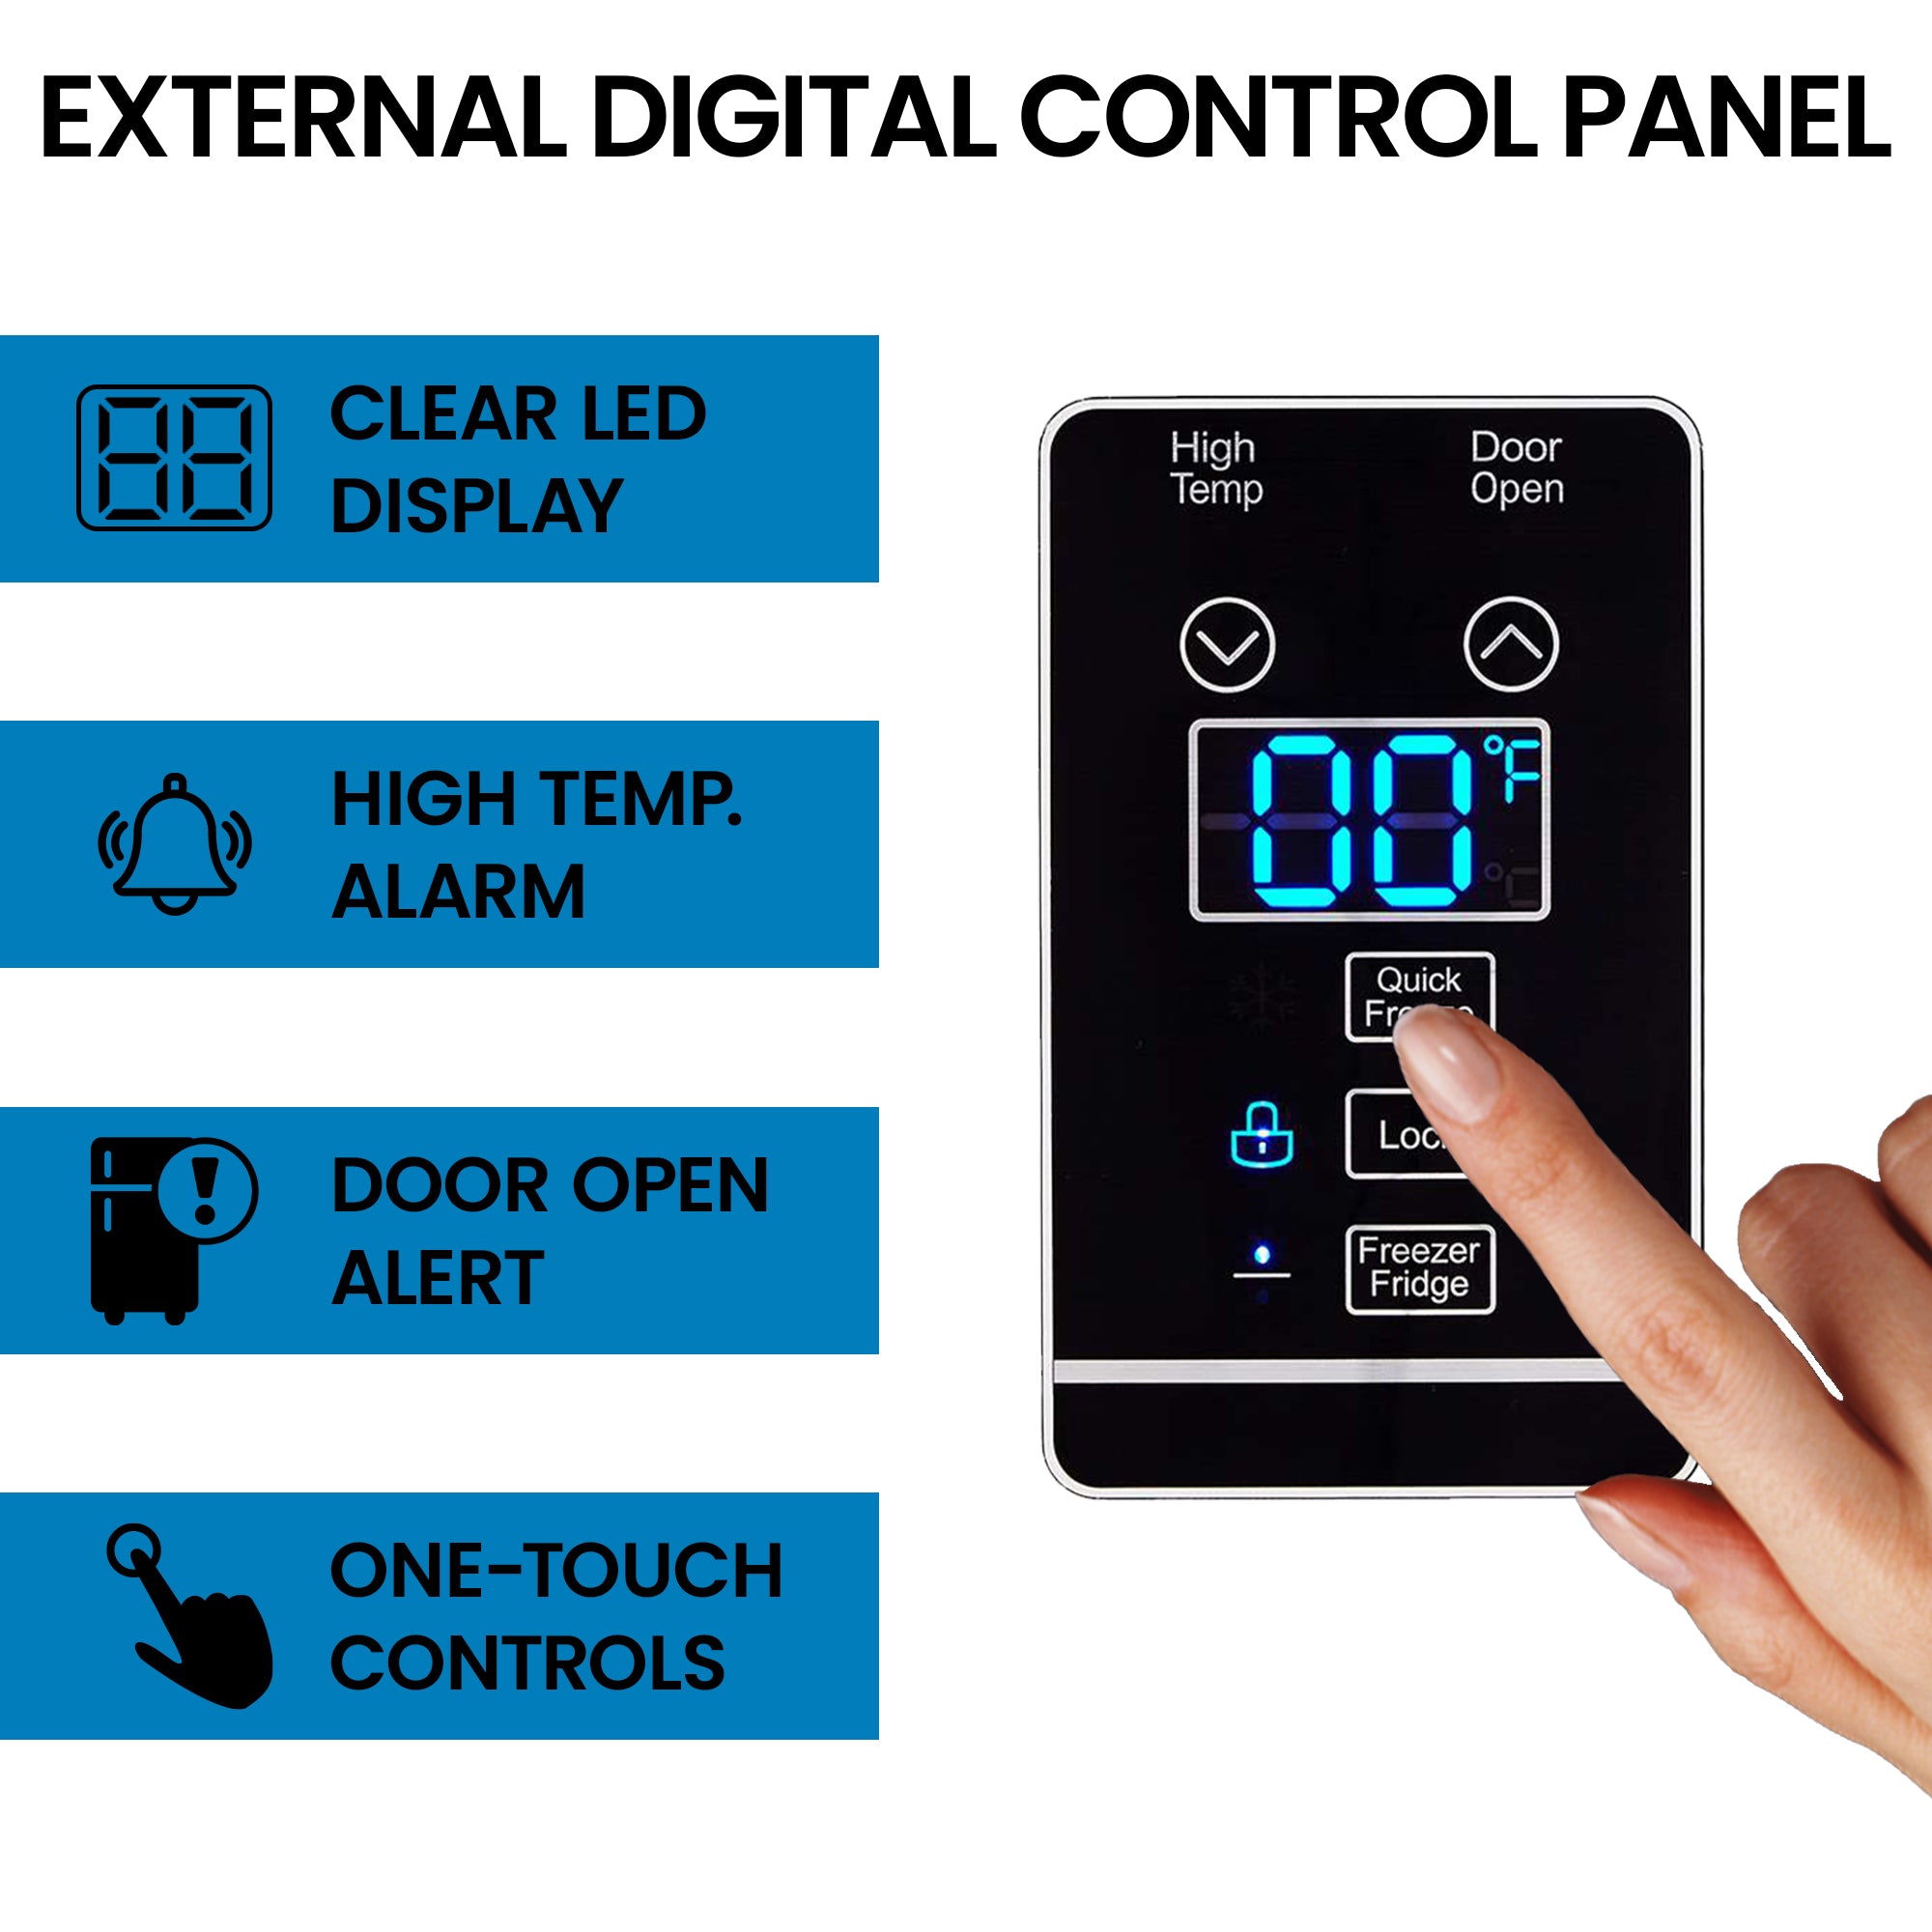 Closeup image of a finger touching the digital control panel with features listed to the left: Clear LED display; high temperature alarm; door open alert; one-touch controls.